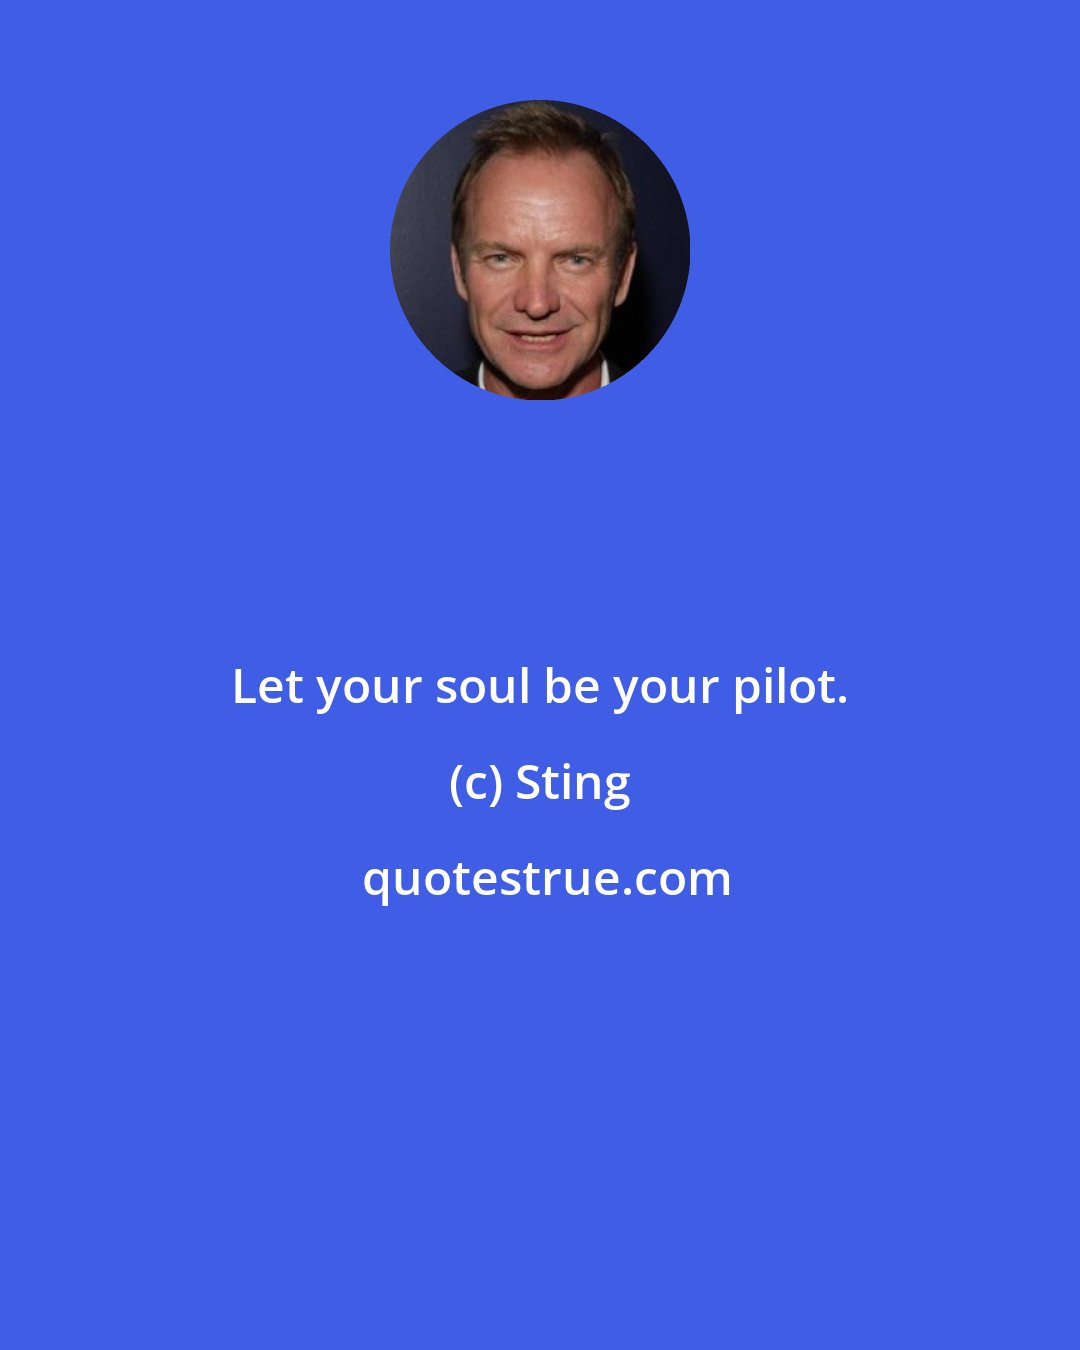 Sting: Let your soul be your pilot.